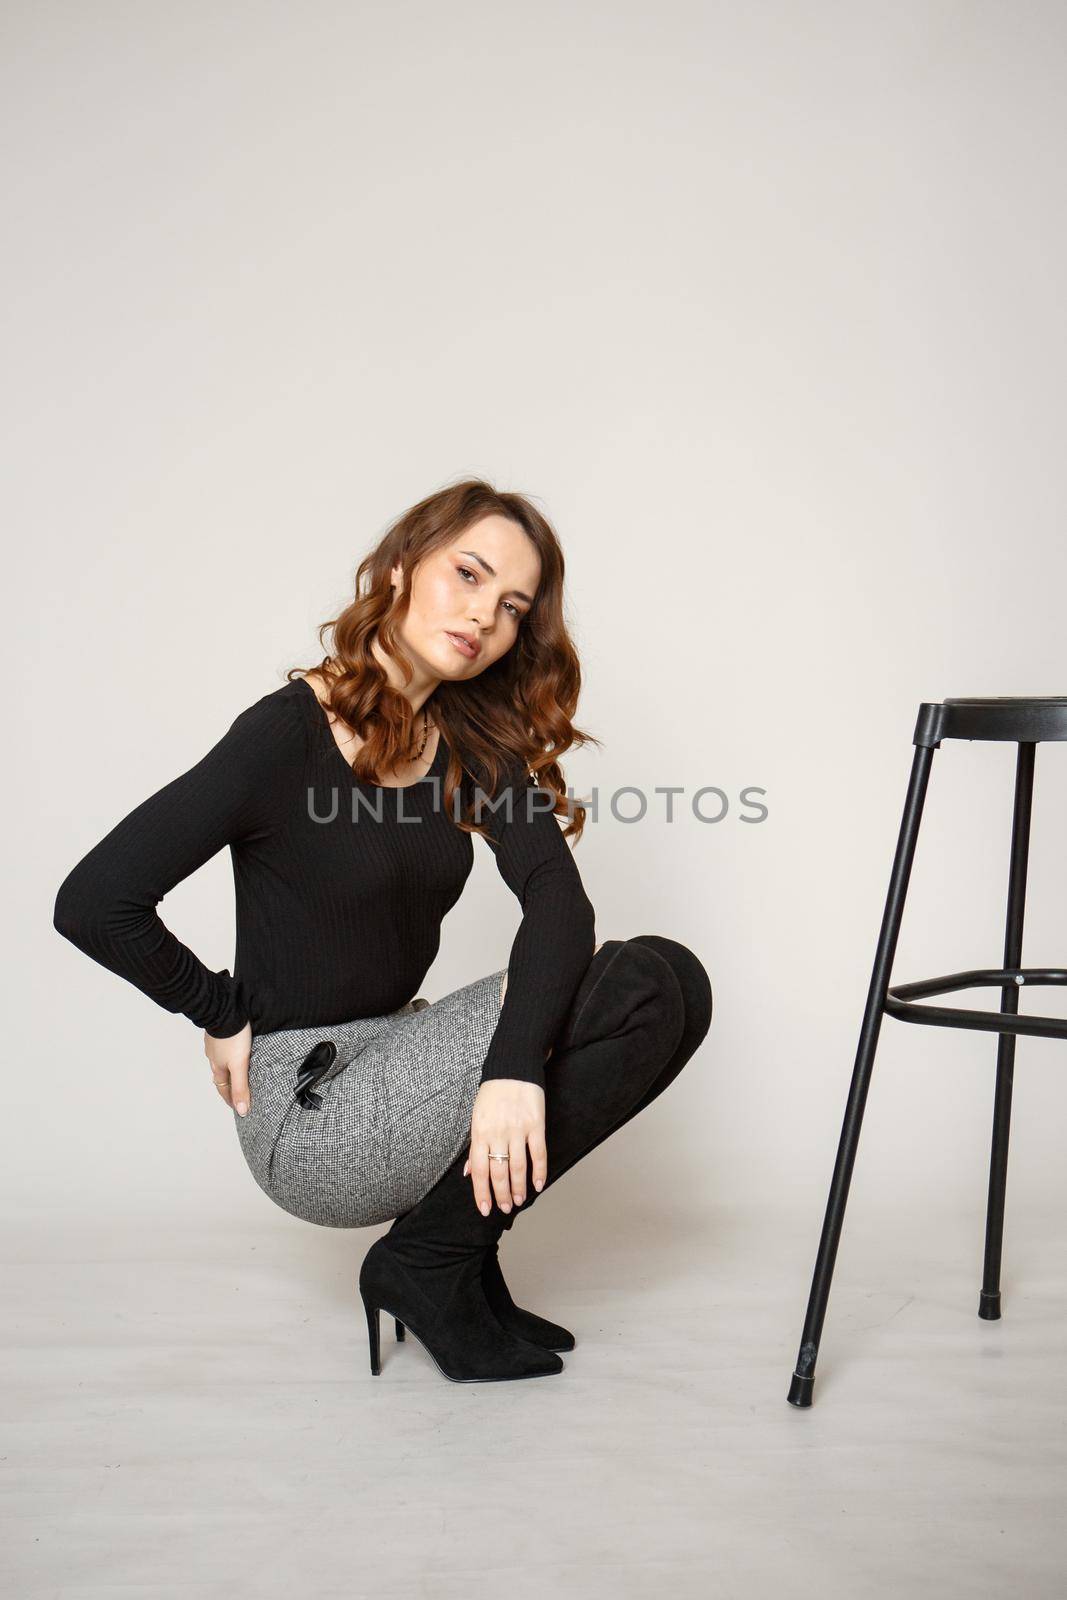 A girl in a black skirt photographed next to a black chair.